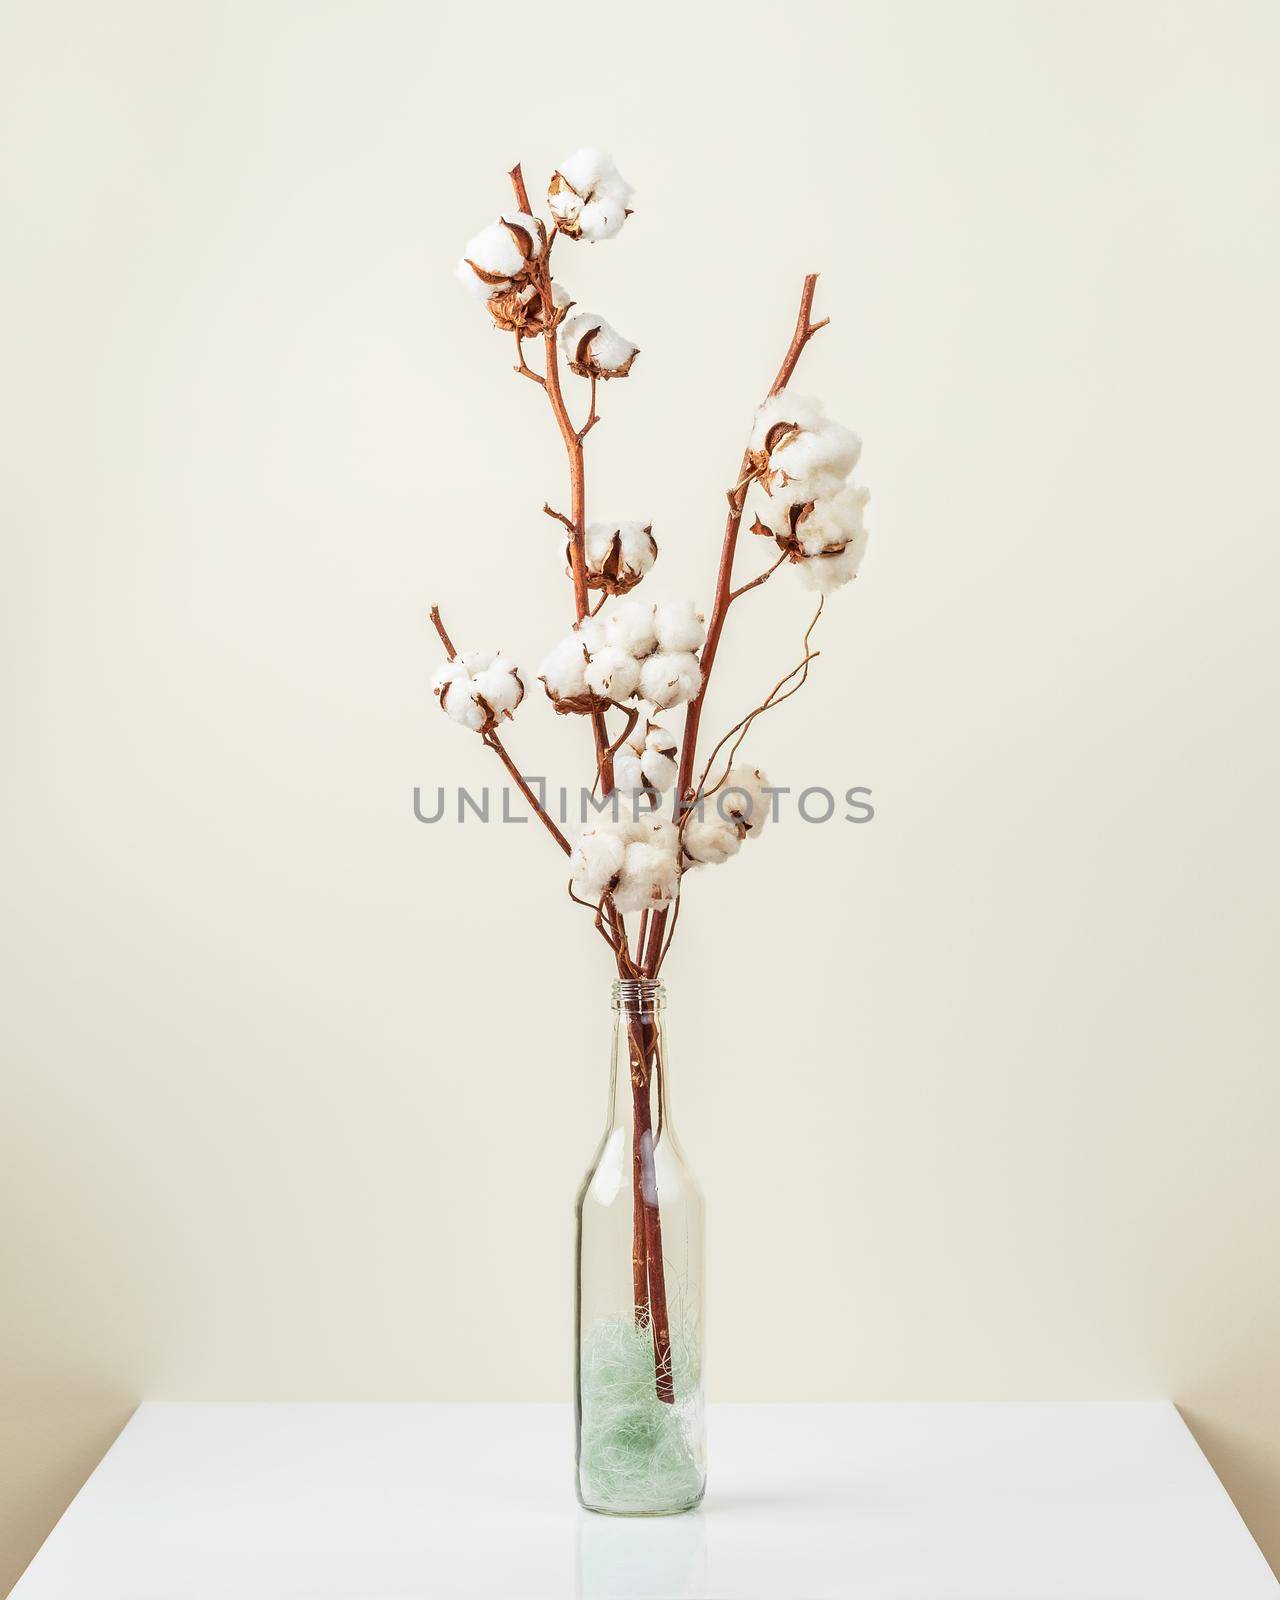 Cotton flower branch bouquet on light background by Syvanych